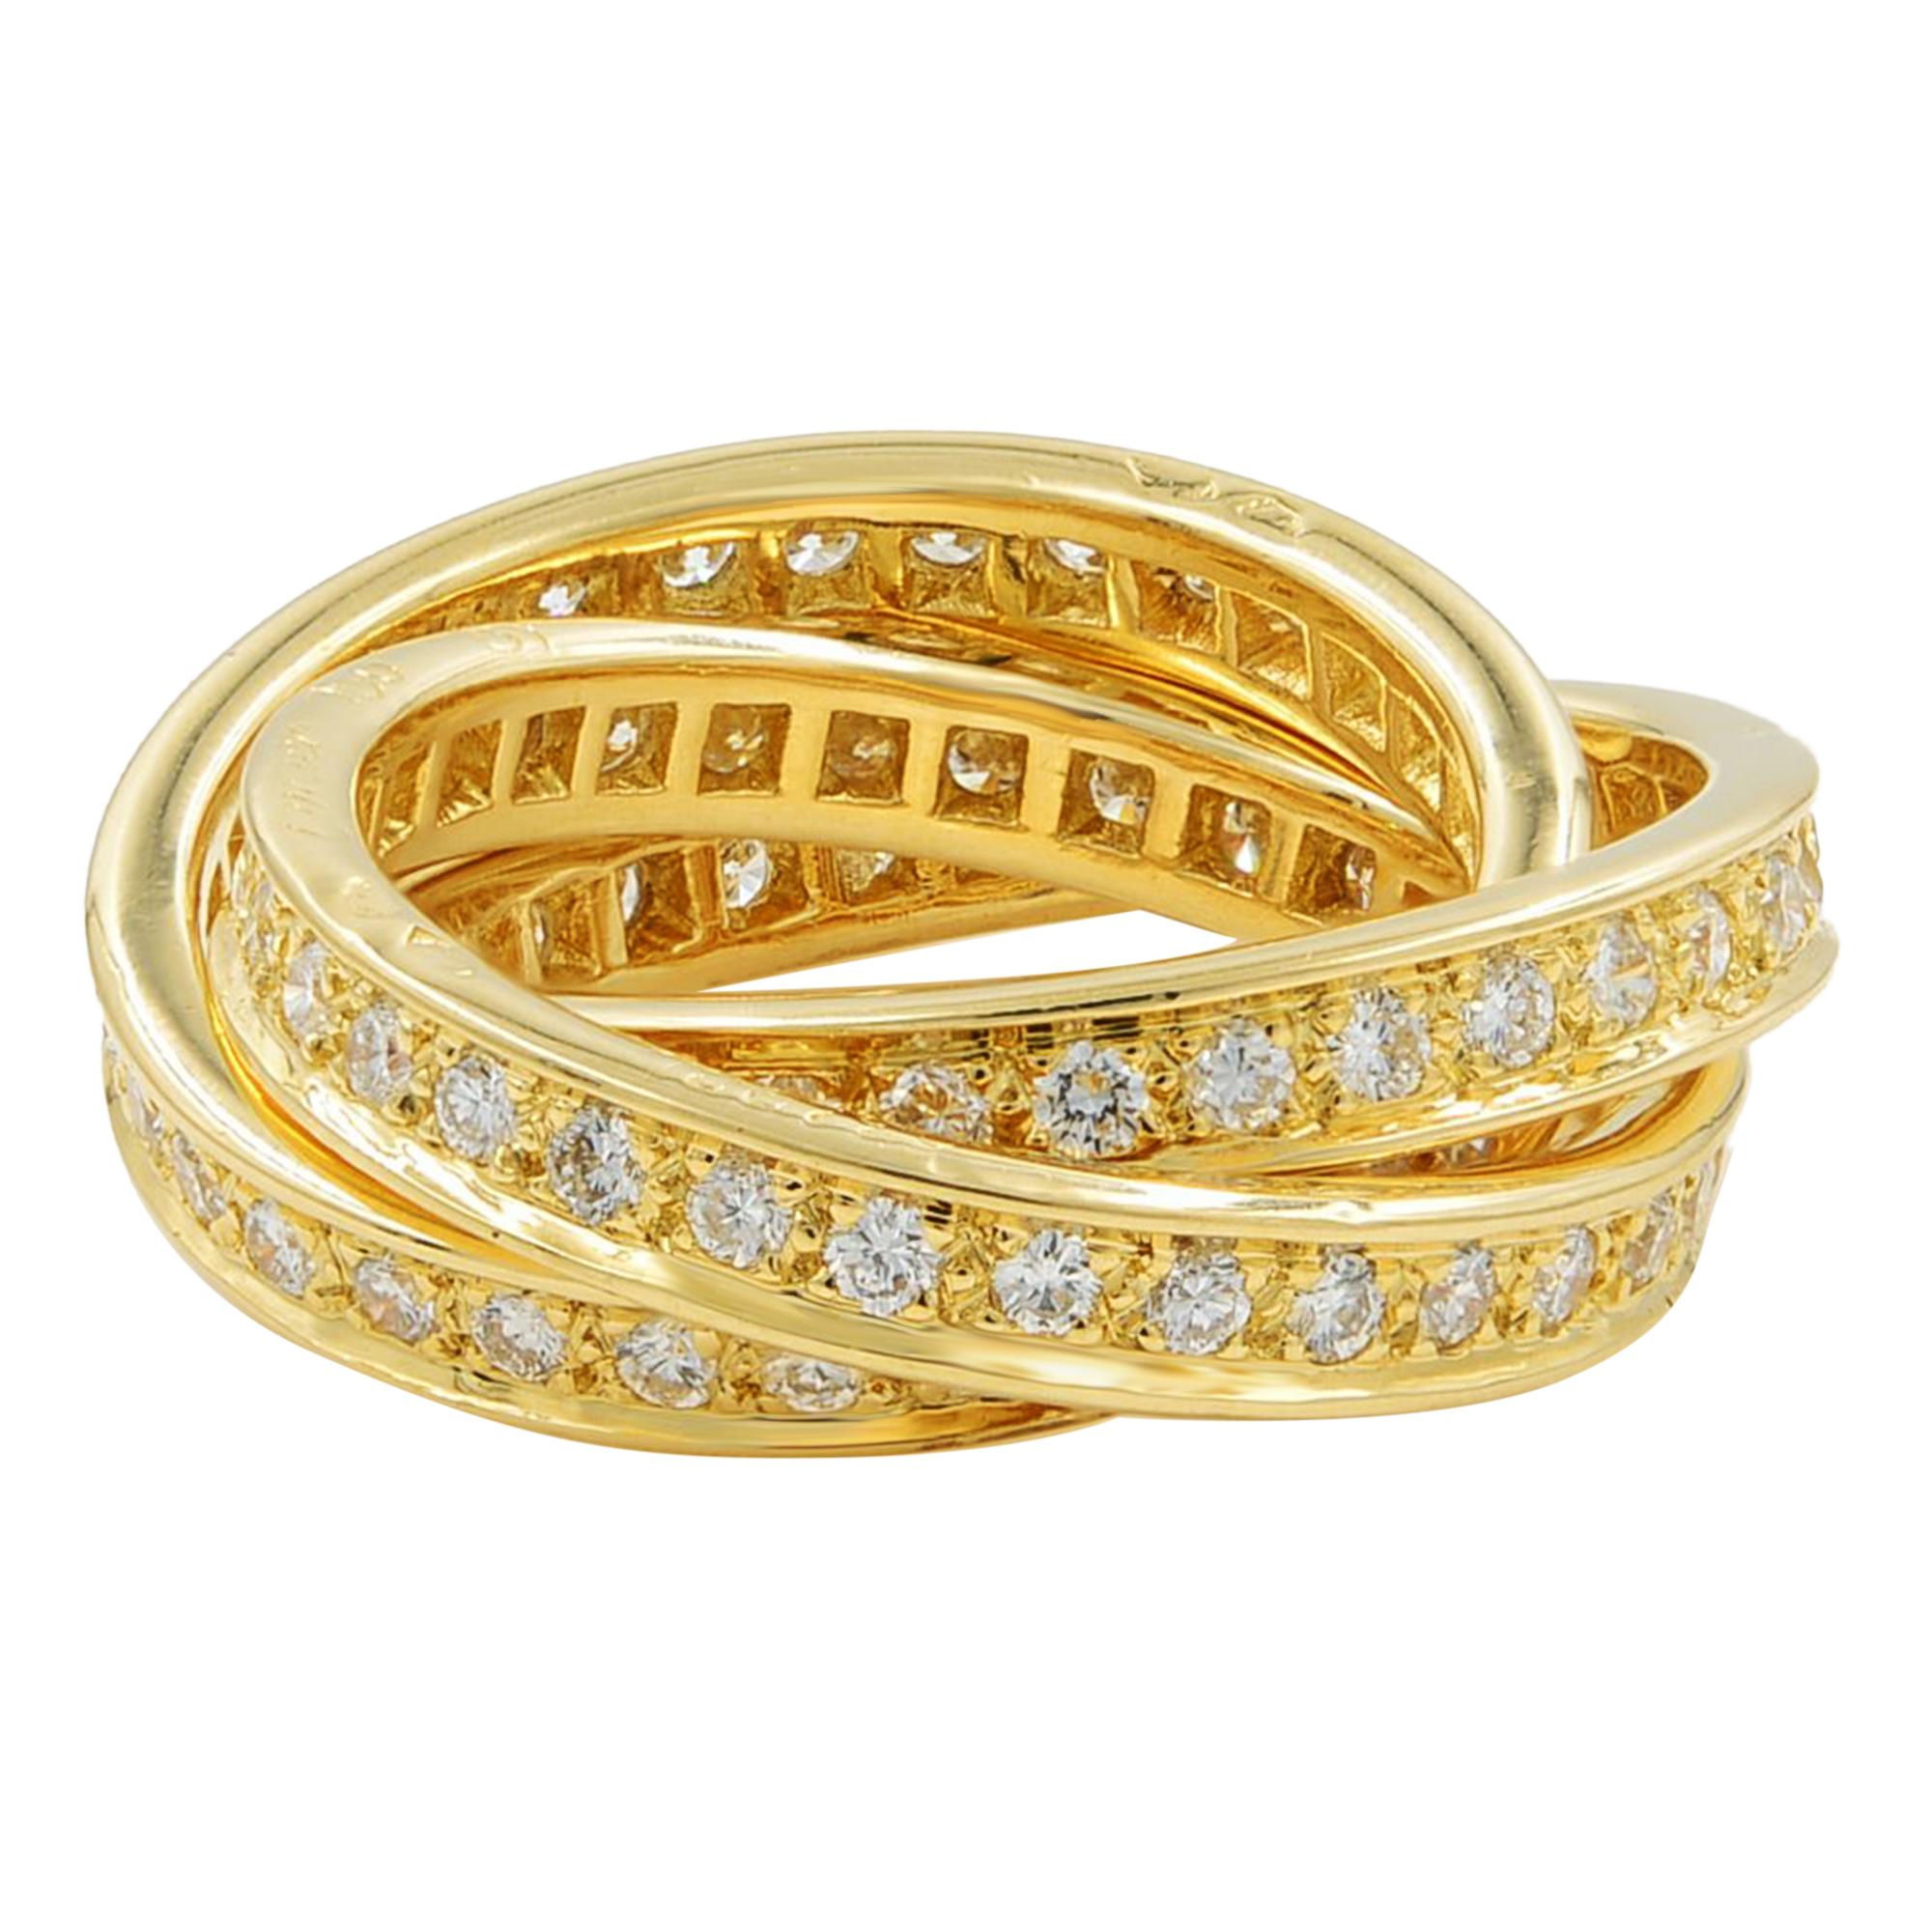 18k yellow gold diamond trinity band, by Cartier, France. This diamond-set Cartier's iconic Trinity rolling ring is impeccably chic. Set with 1.55 carats of superb diamonds. It is meticulously fabricated and comes with its original box and